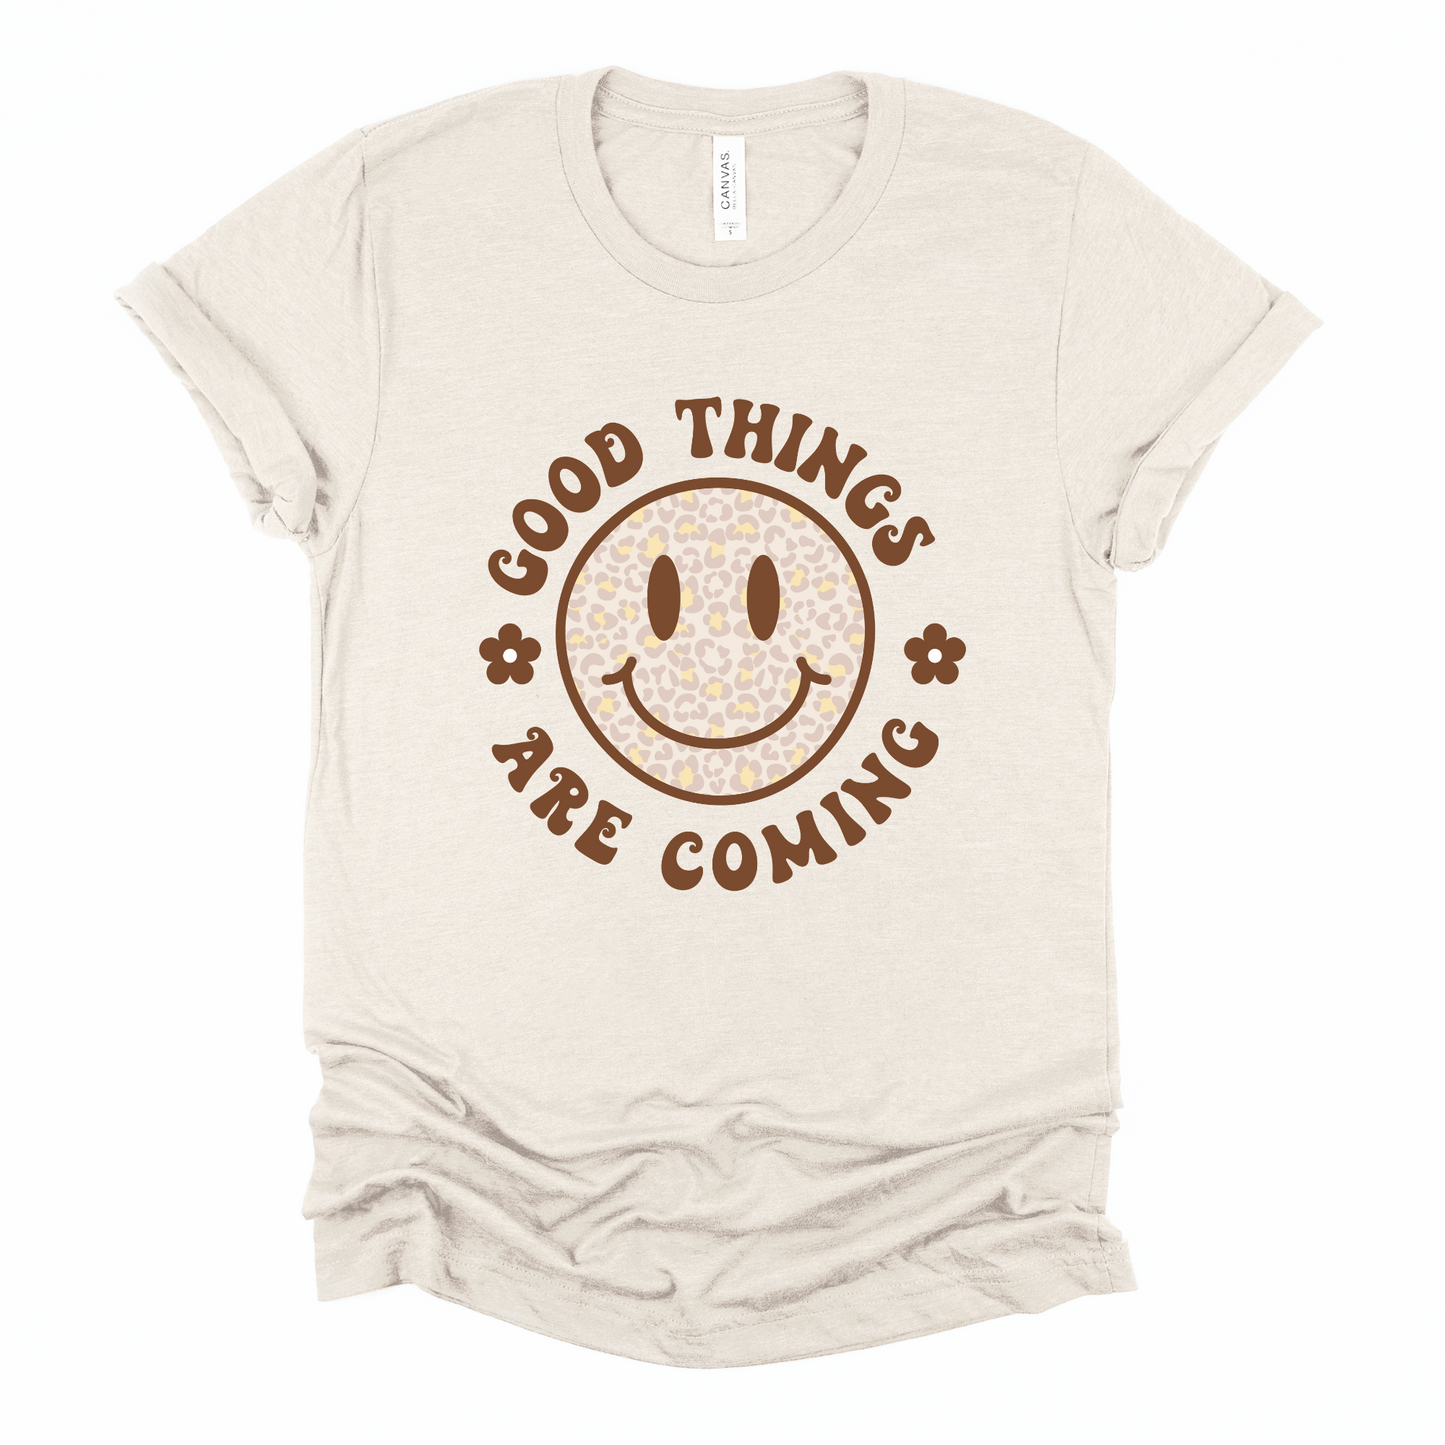 Good Things are Coming - Alonna's Legging Land